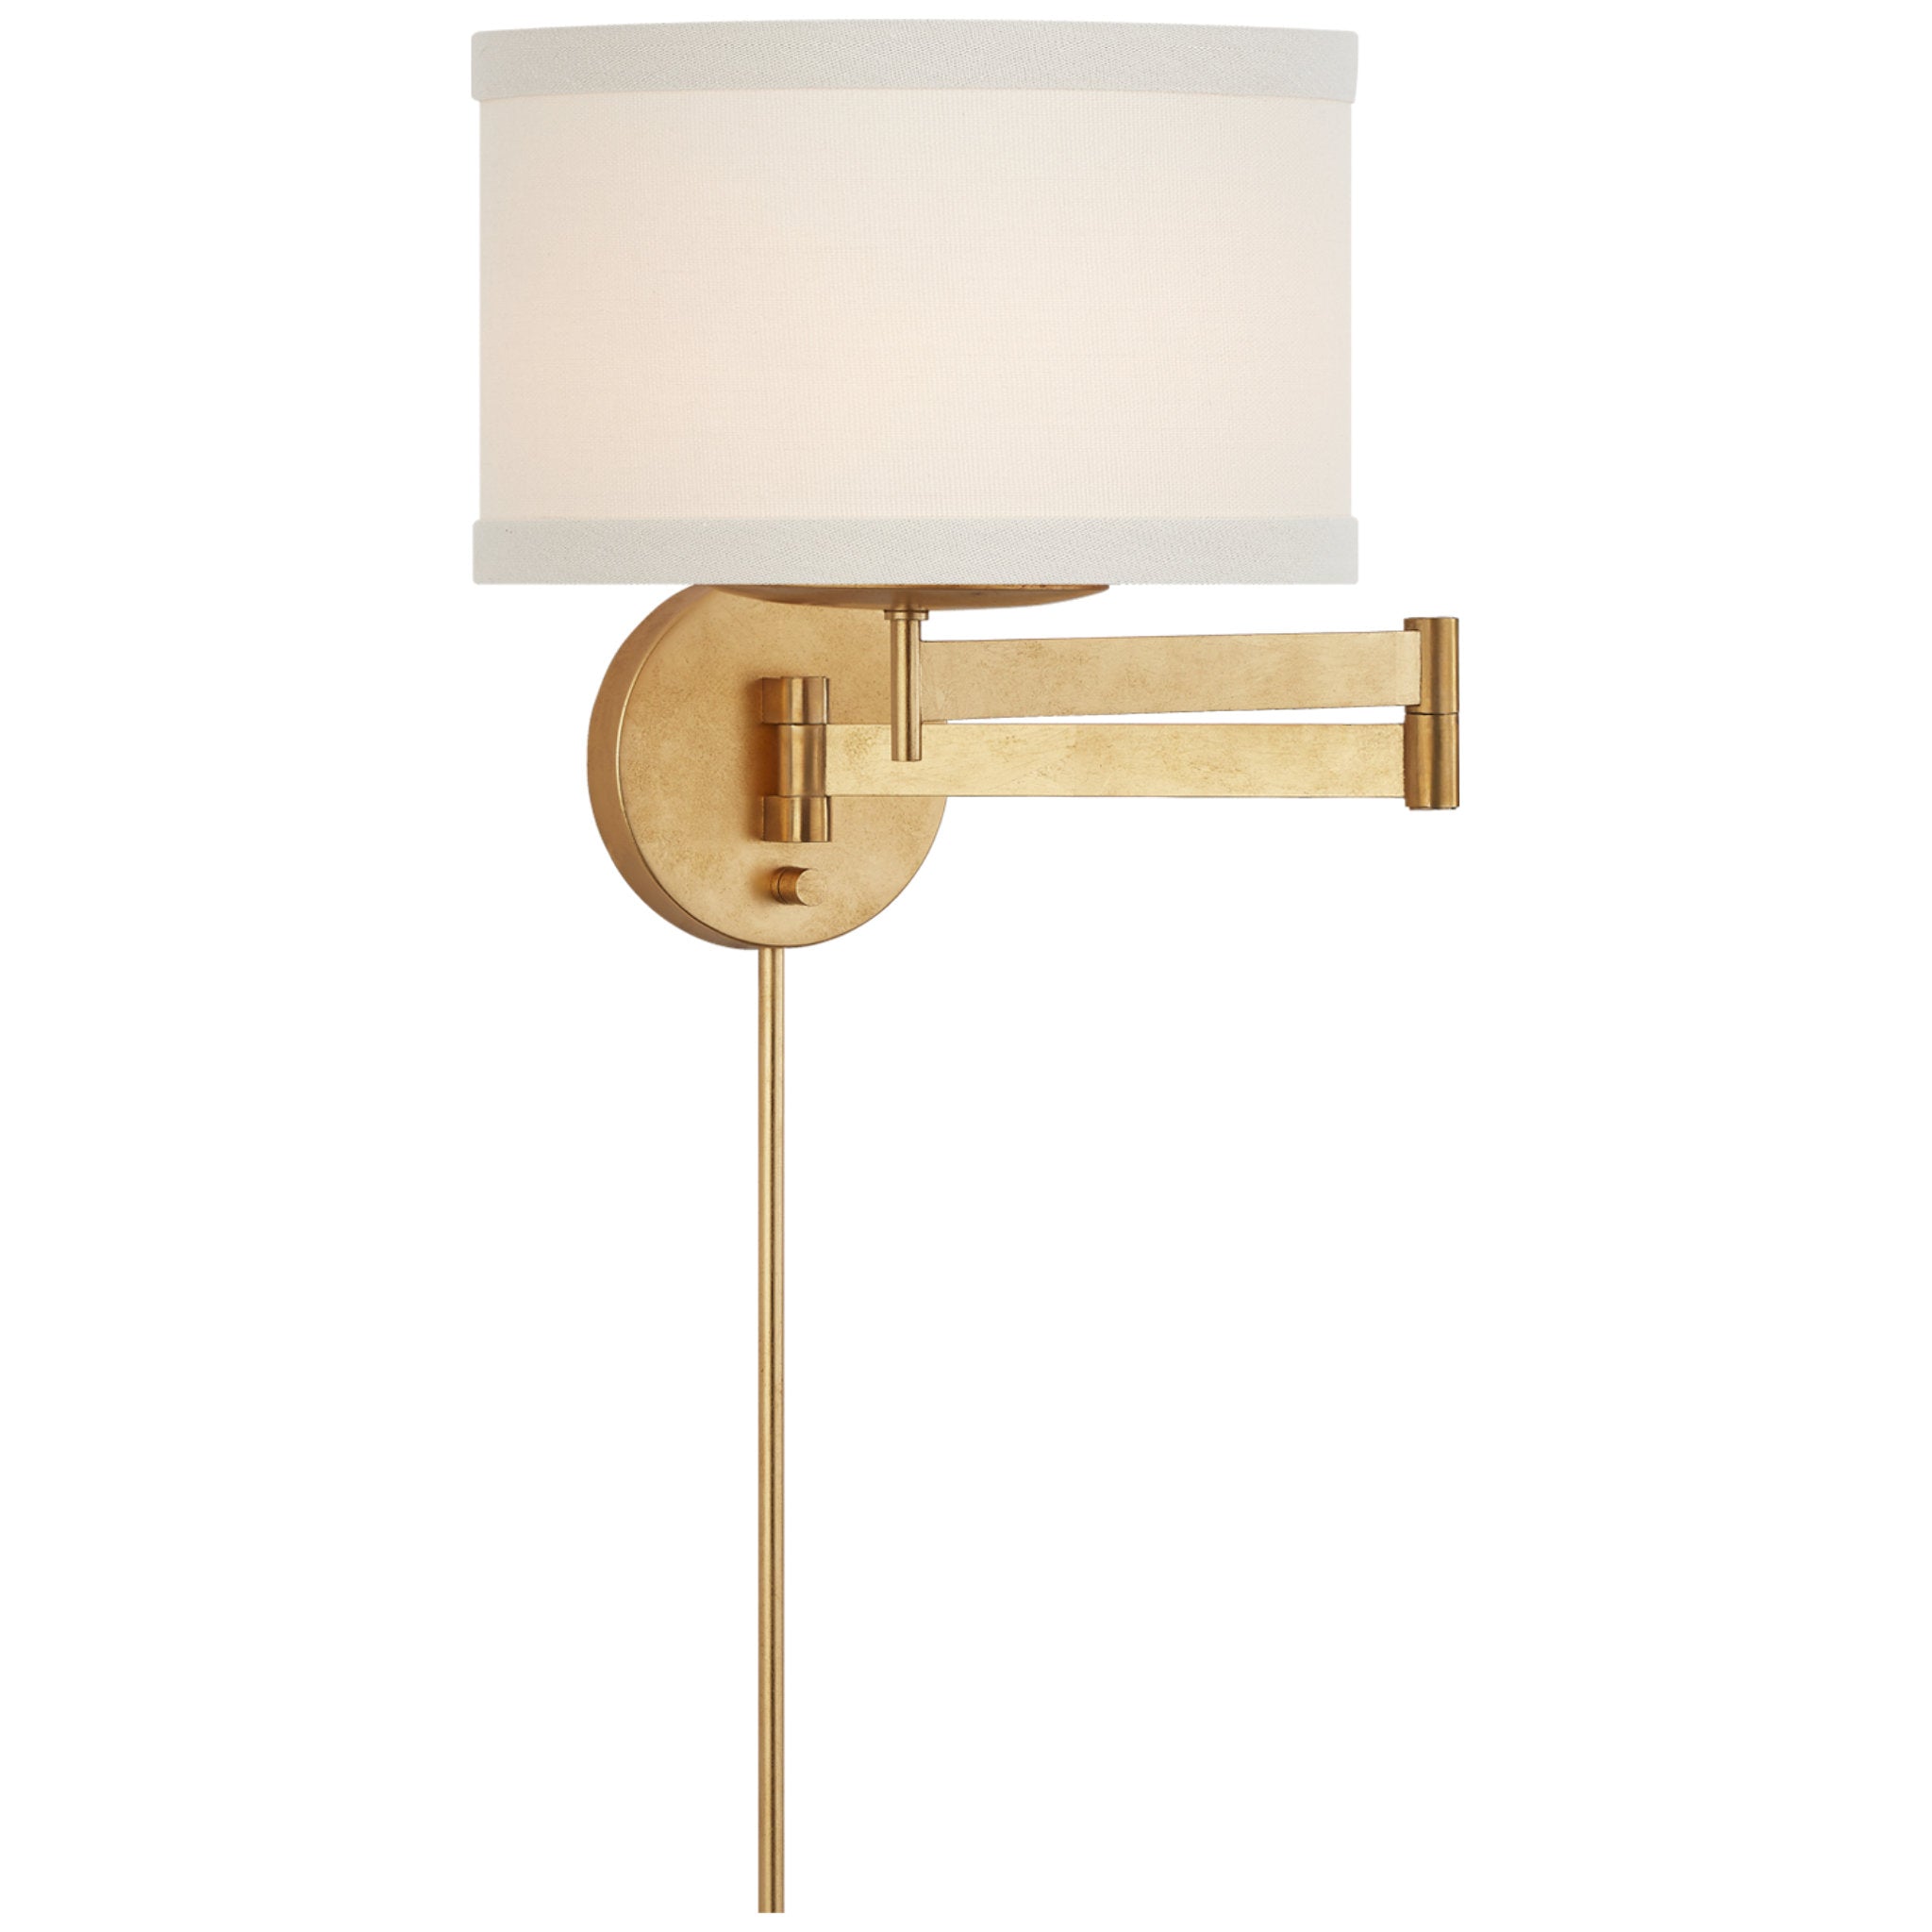 kate spade new york Walker Swing Arm Sconce in Gild with Cream Linen Shade